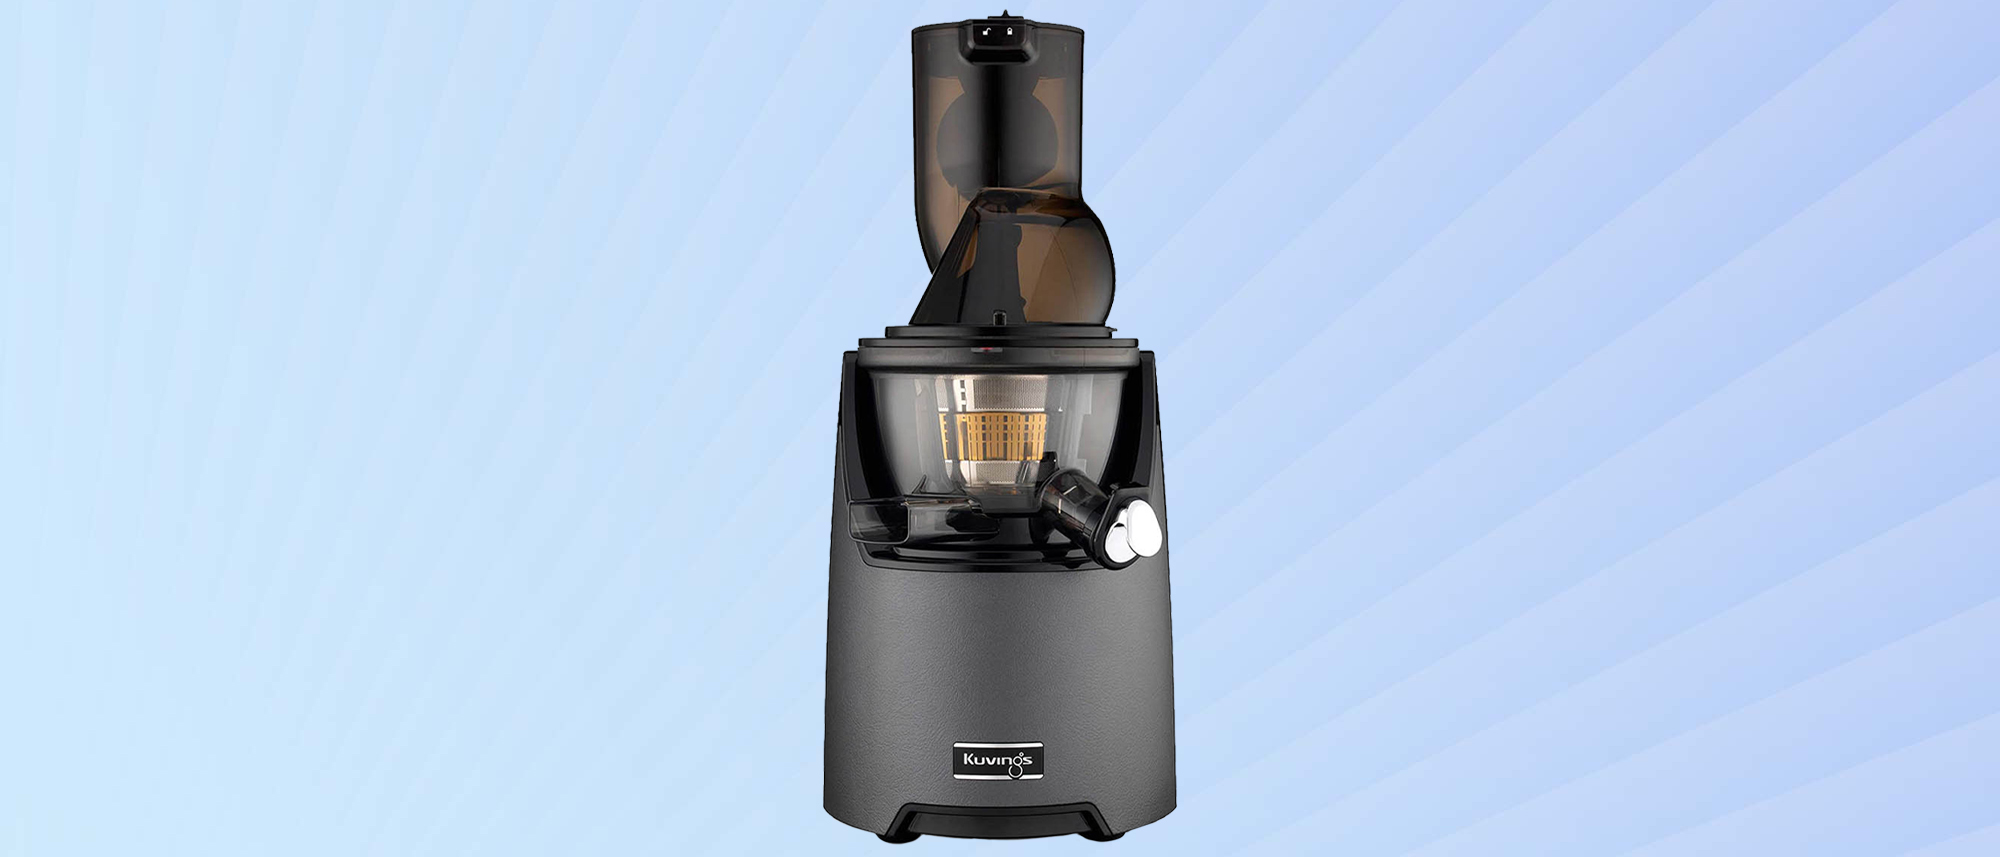 Kuvings Whole Juicer REVO830 Review and Demo 